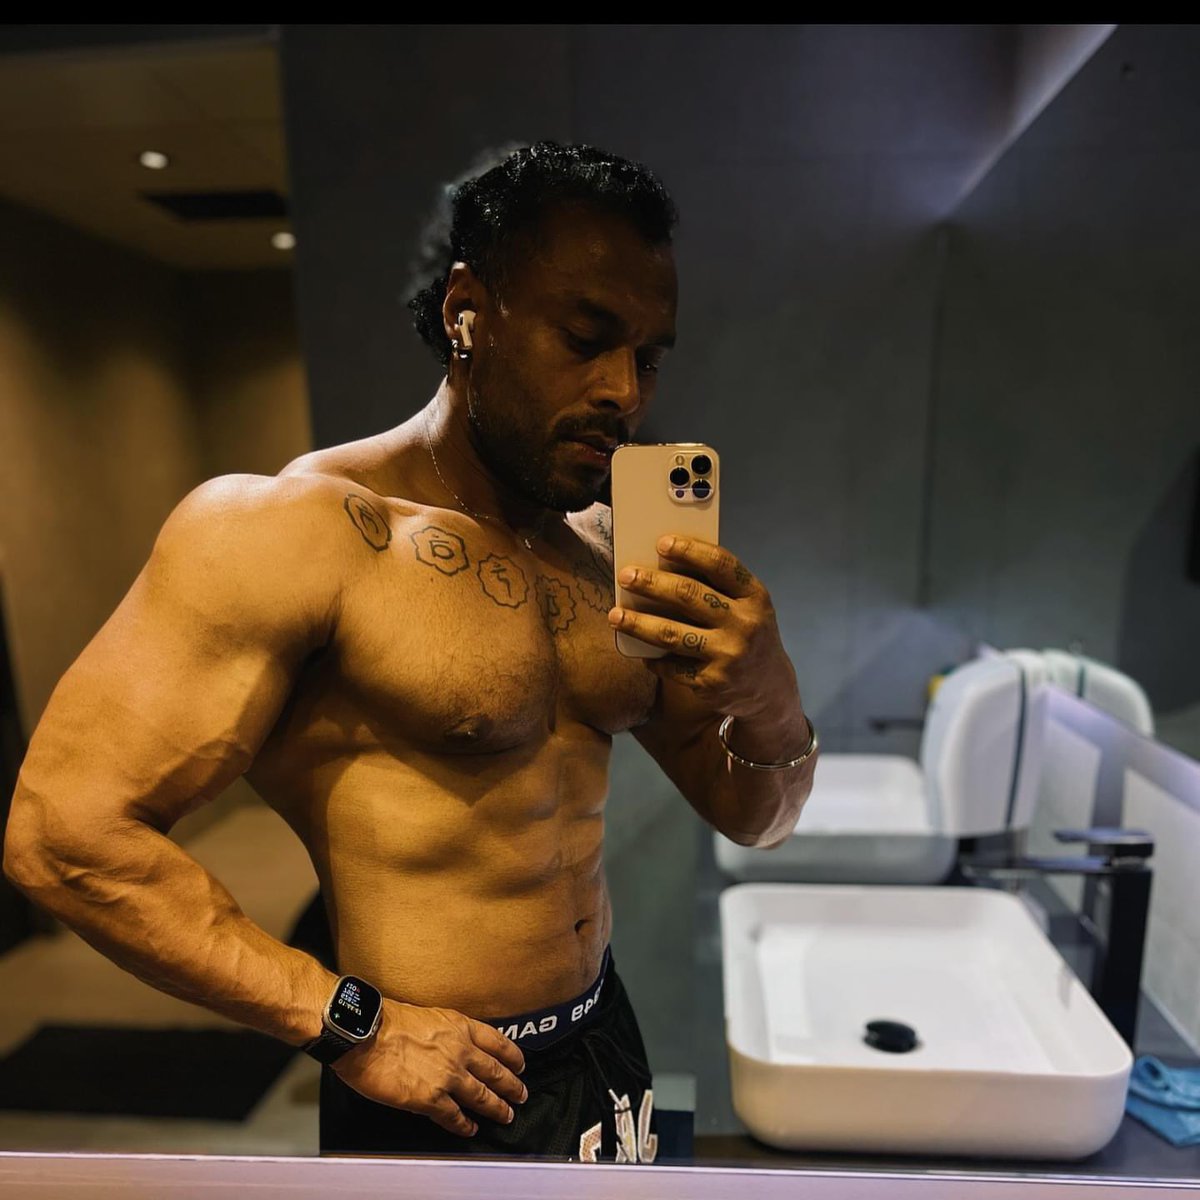 Please lower the cost of living. I'm not built for OnlyFans.
#getfitwithraznishh #blessedandthankful #personaltrainer #trainer #bodybuilding #work #fitness #gym #workout #fit #training #health #healthy #fitnessaddict #nutrition #bhfyp #india #indian #dubai #mydubai #dxb